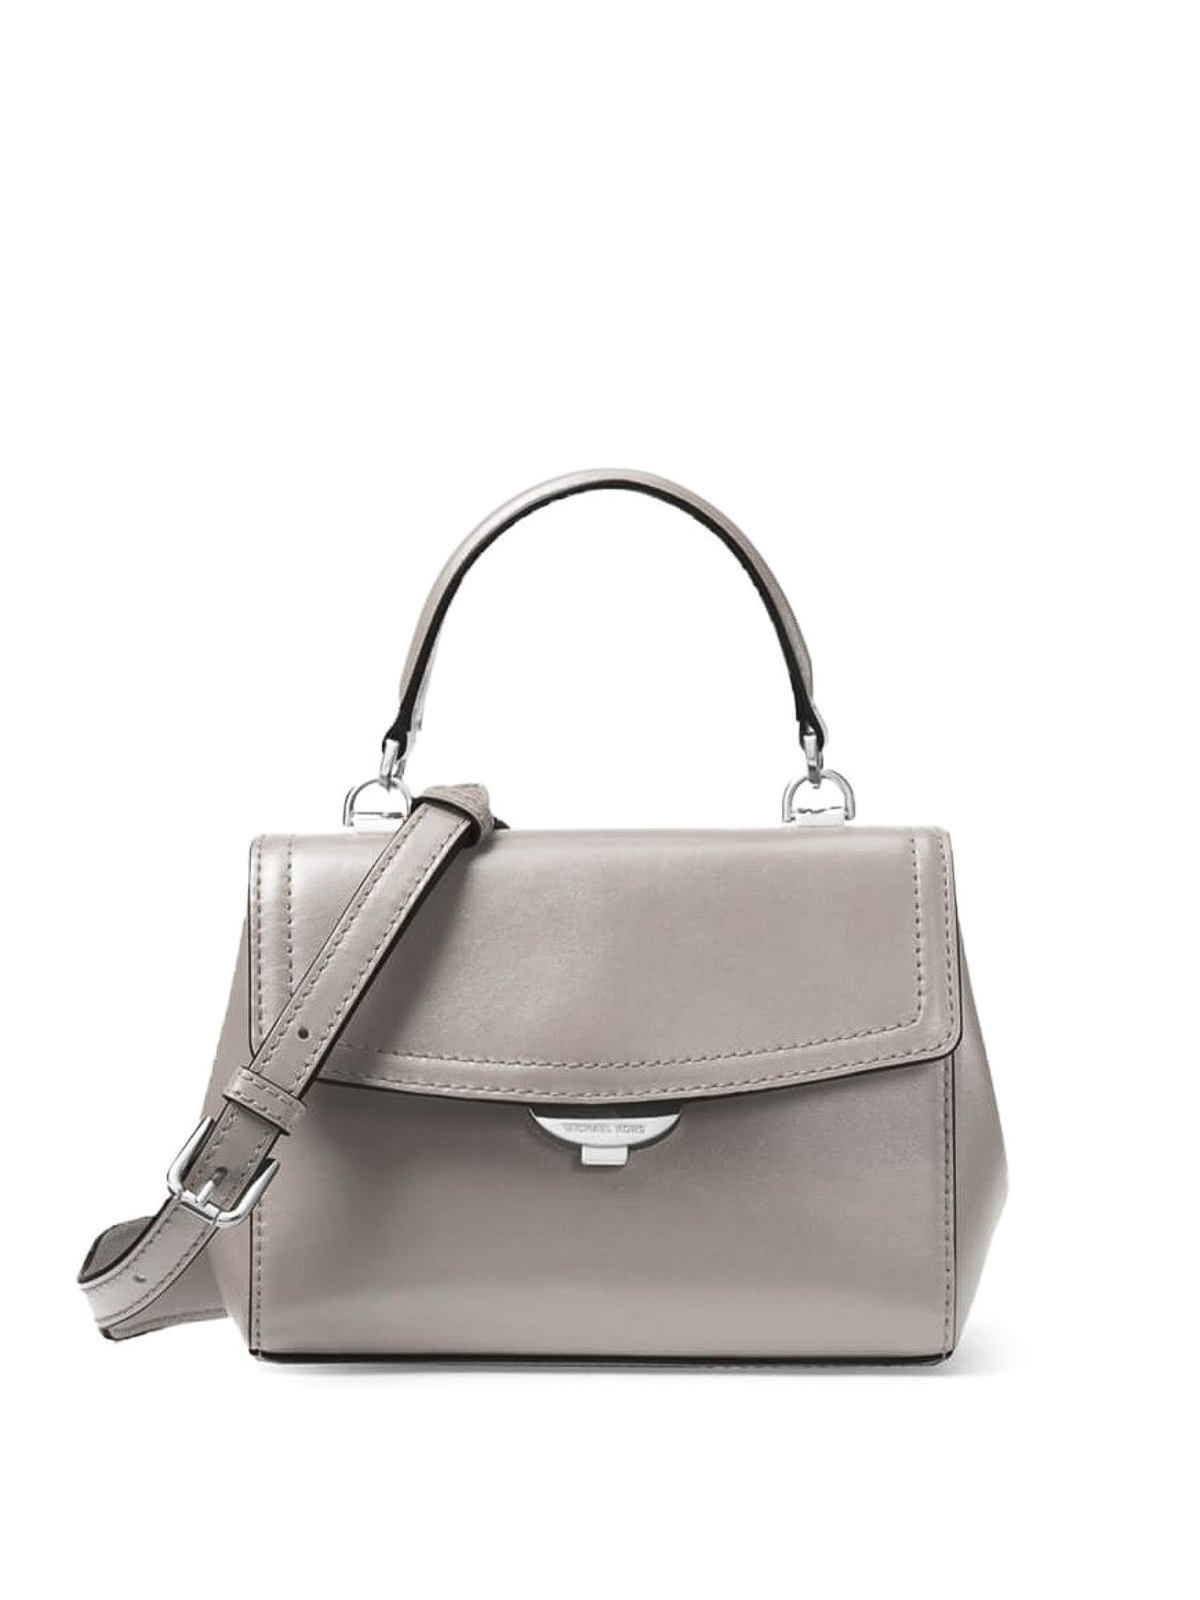 Rosemary Large Shoulder Tote Bag by Michael Kors Online  THE ICONIC   Australia